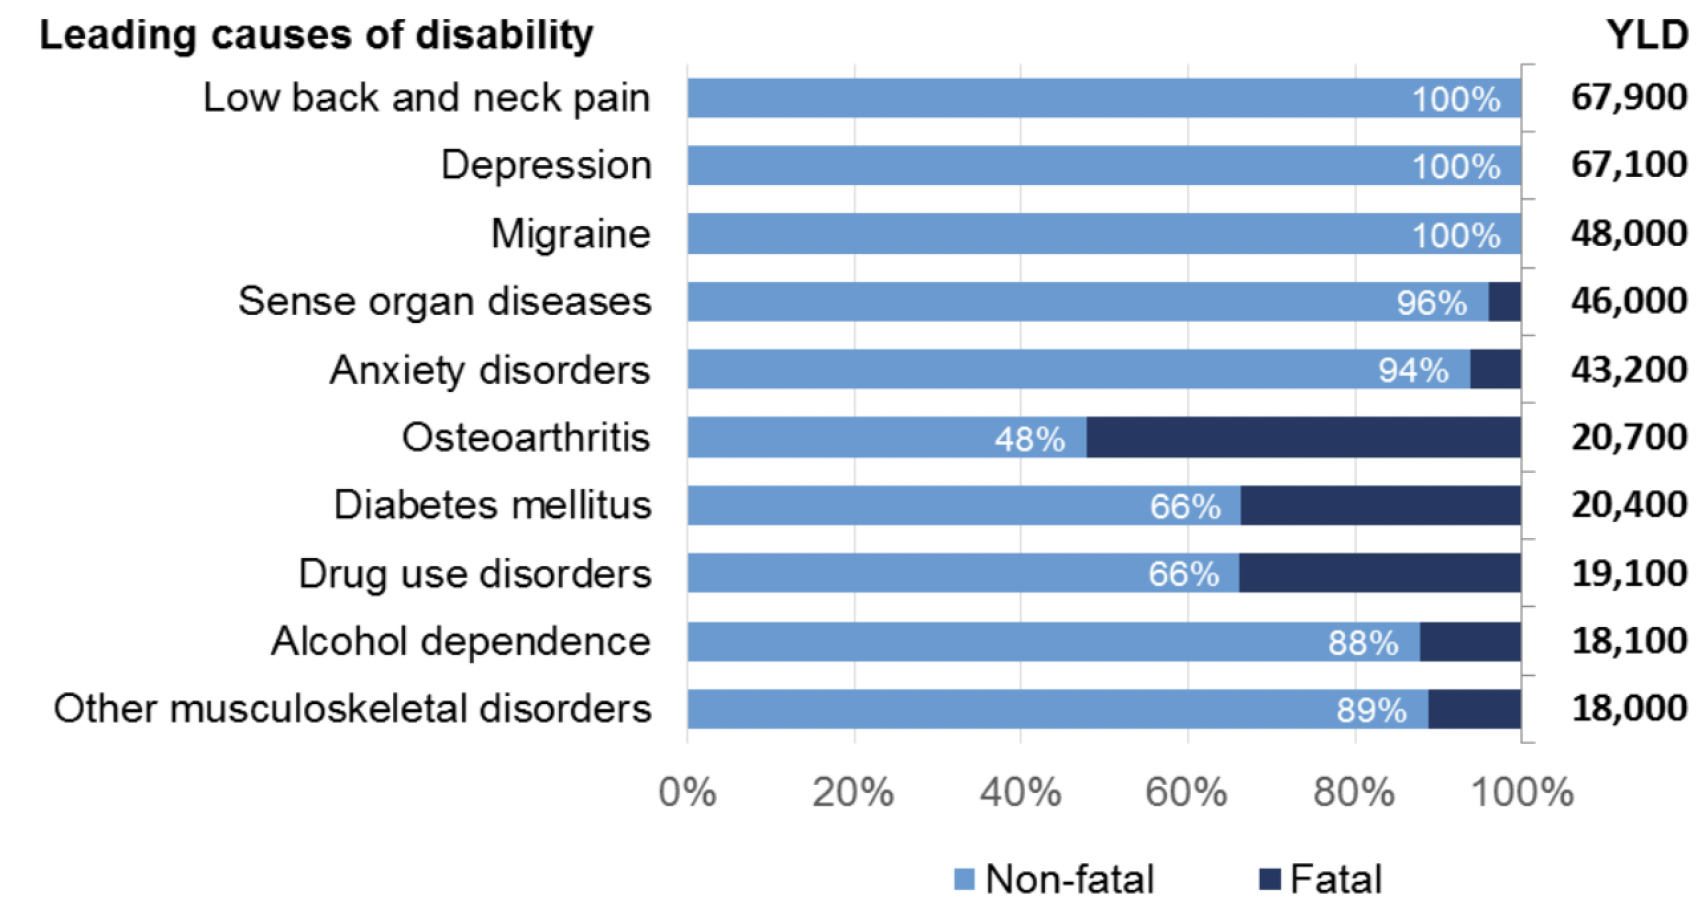 Bar chart showing the leading causes of disability in Scotland in 2016. Low back and neck pain had the highest estimates, followed by depression and migraine. 